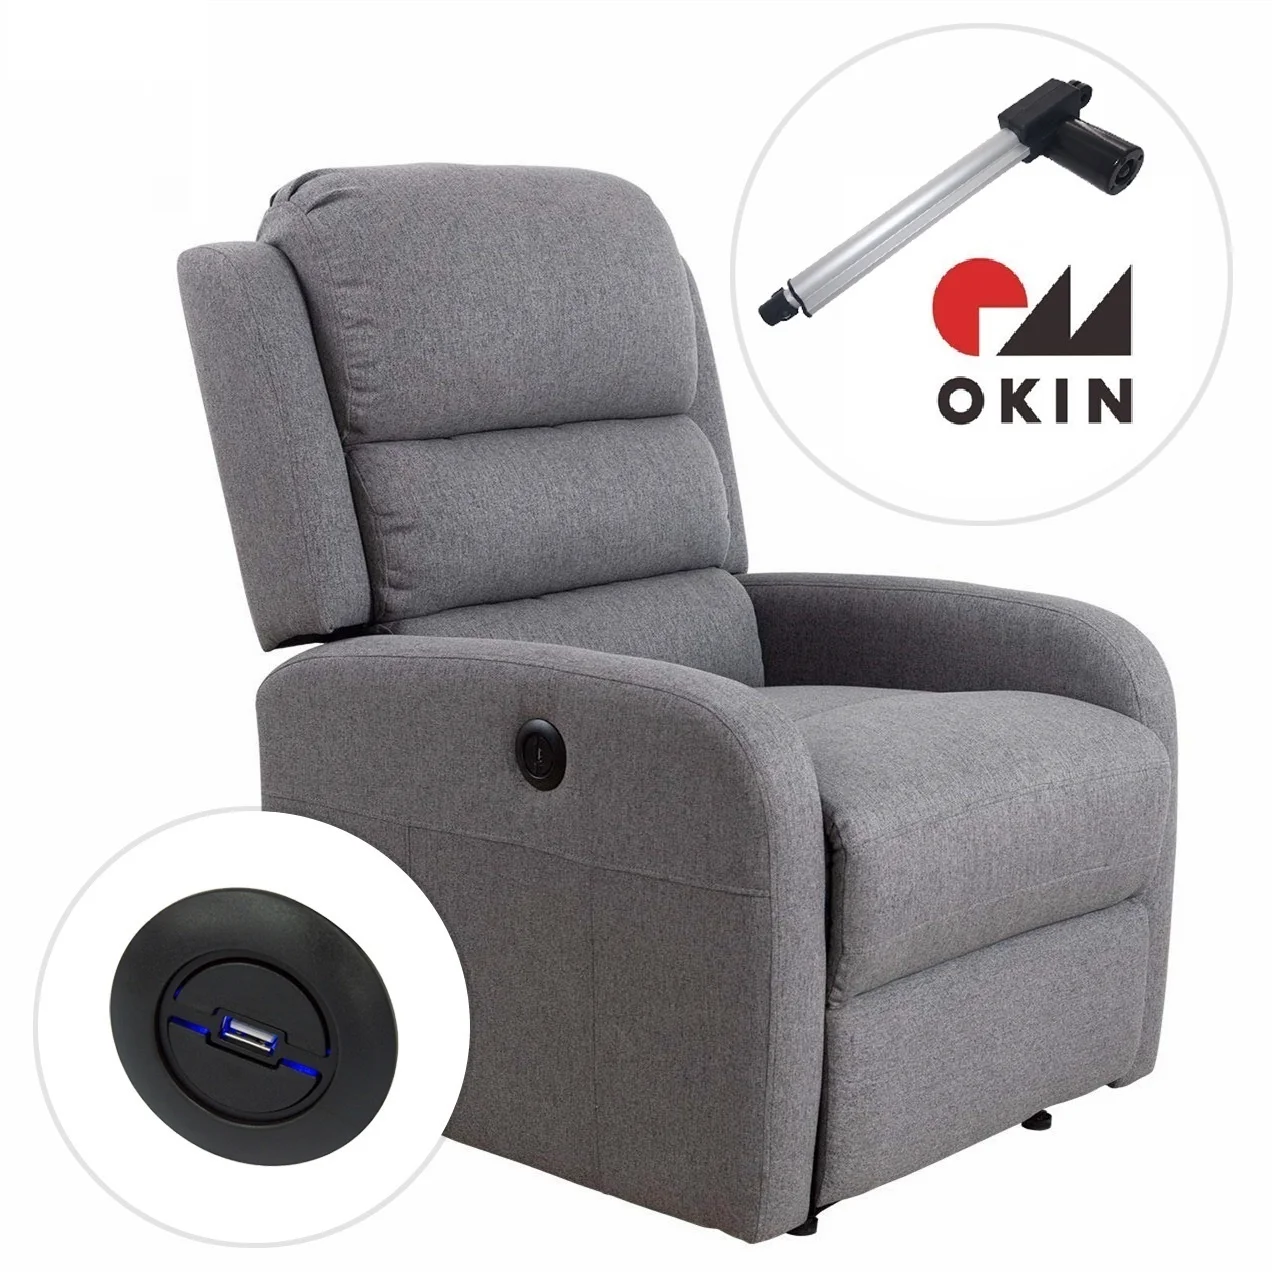 

JKY Furniture Living Room Leisure Relaxing Power Electric Recliner Sofa Chair With USB Charger